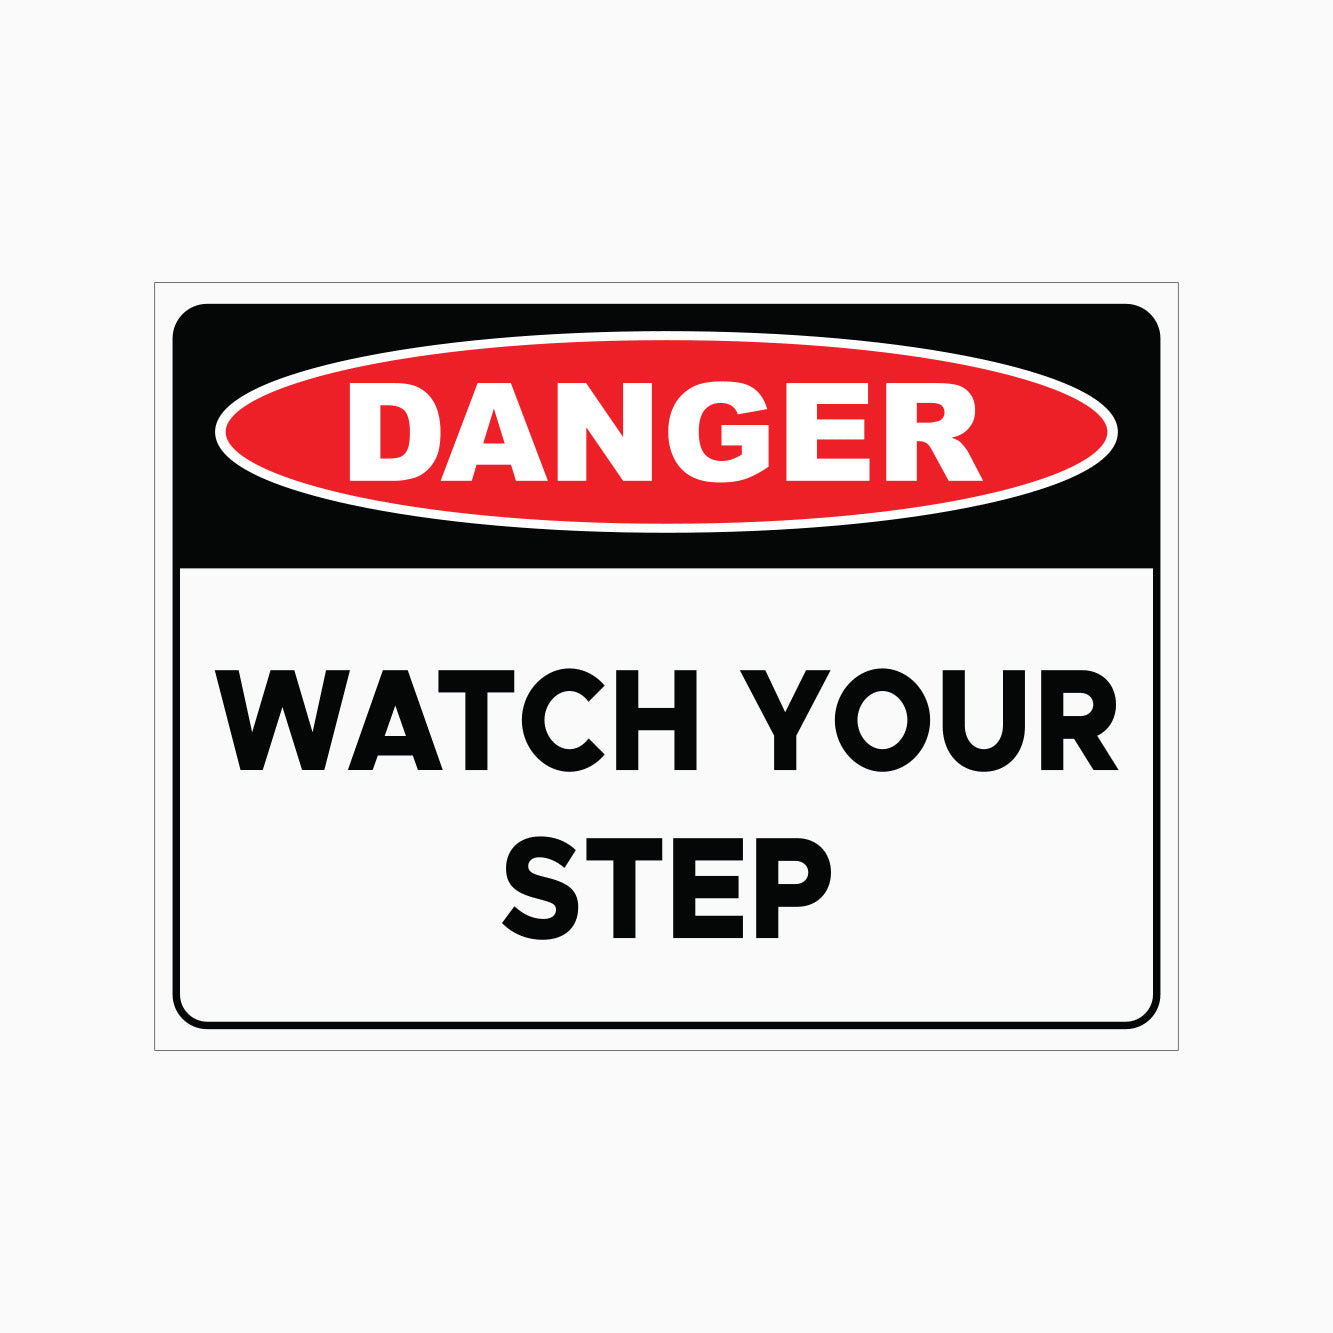 DANGER SIGN - WATCH YOUR STEP SIGN